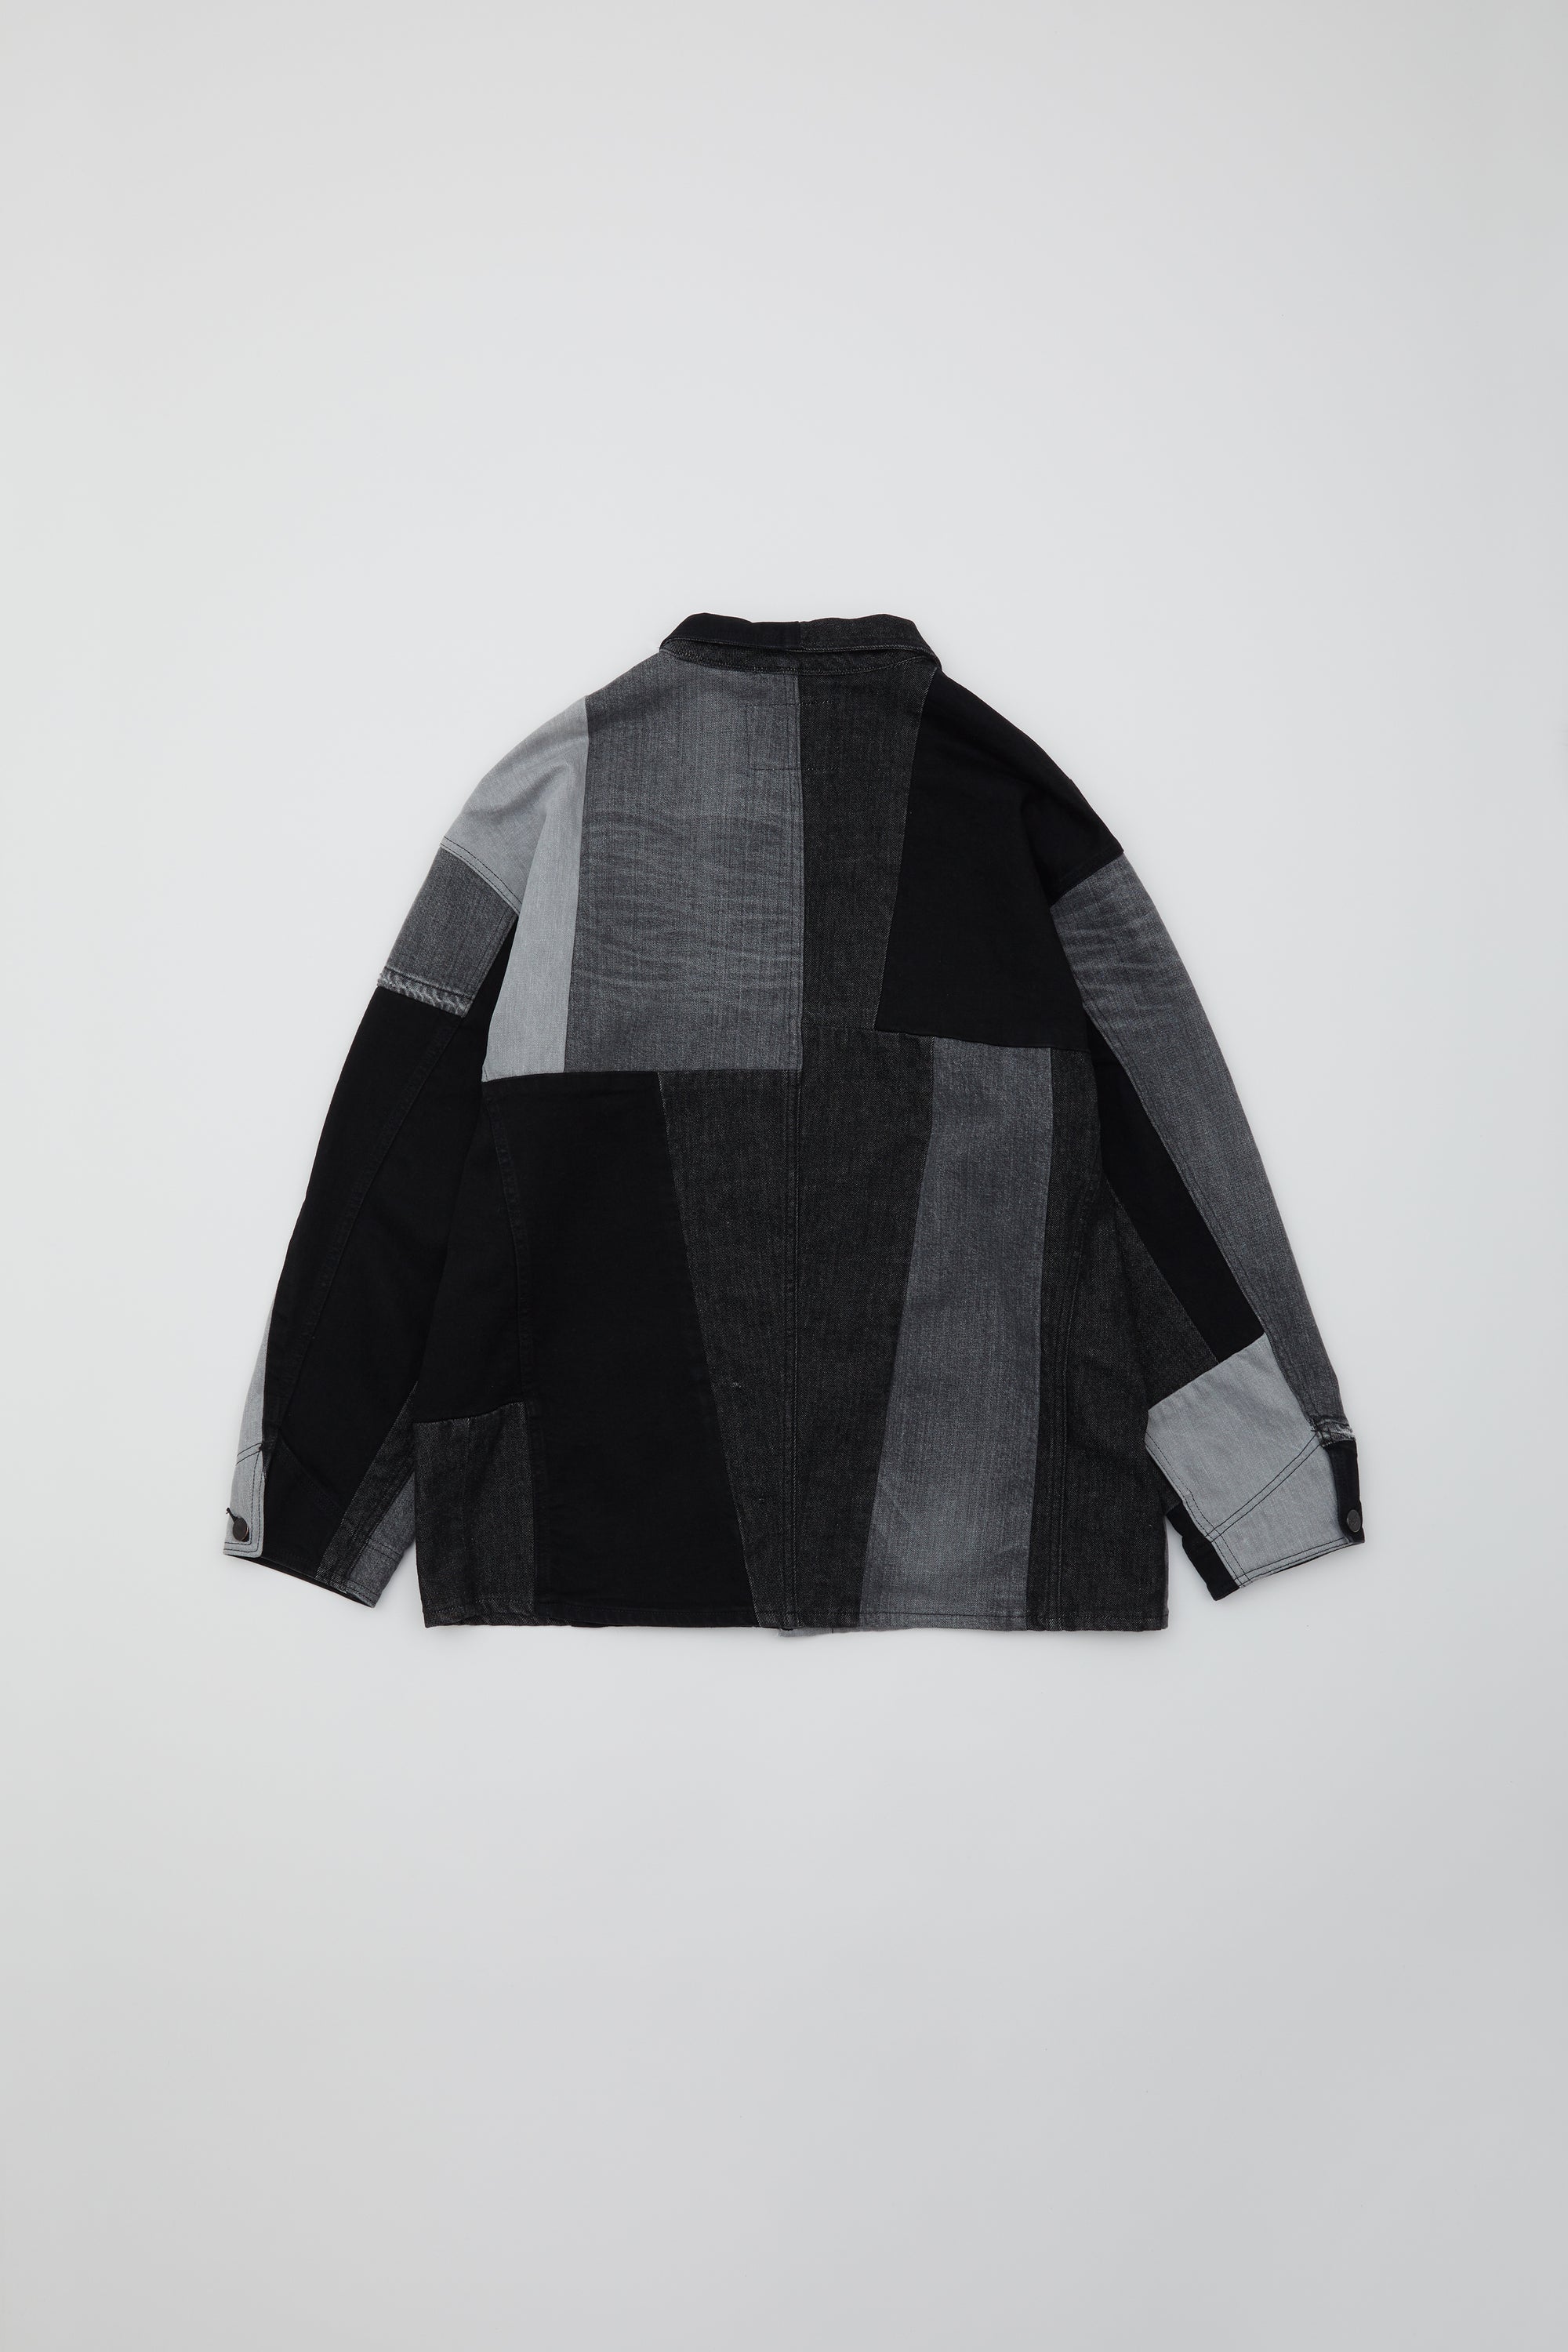 Up cycle patchwork jacket